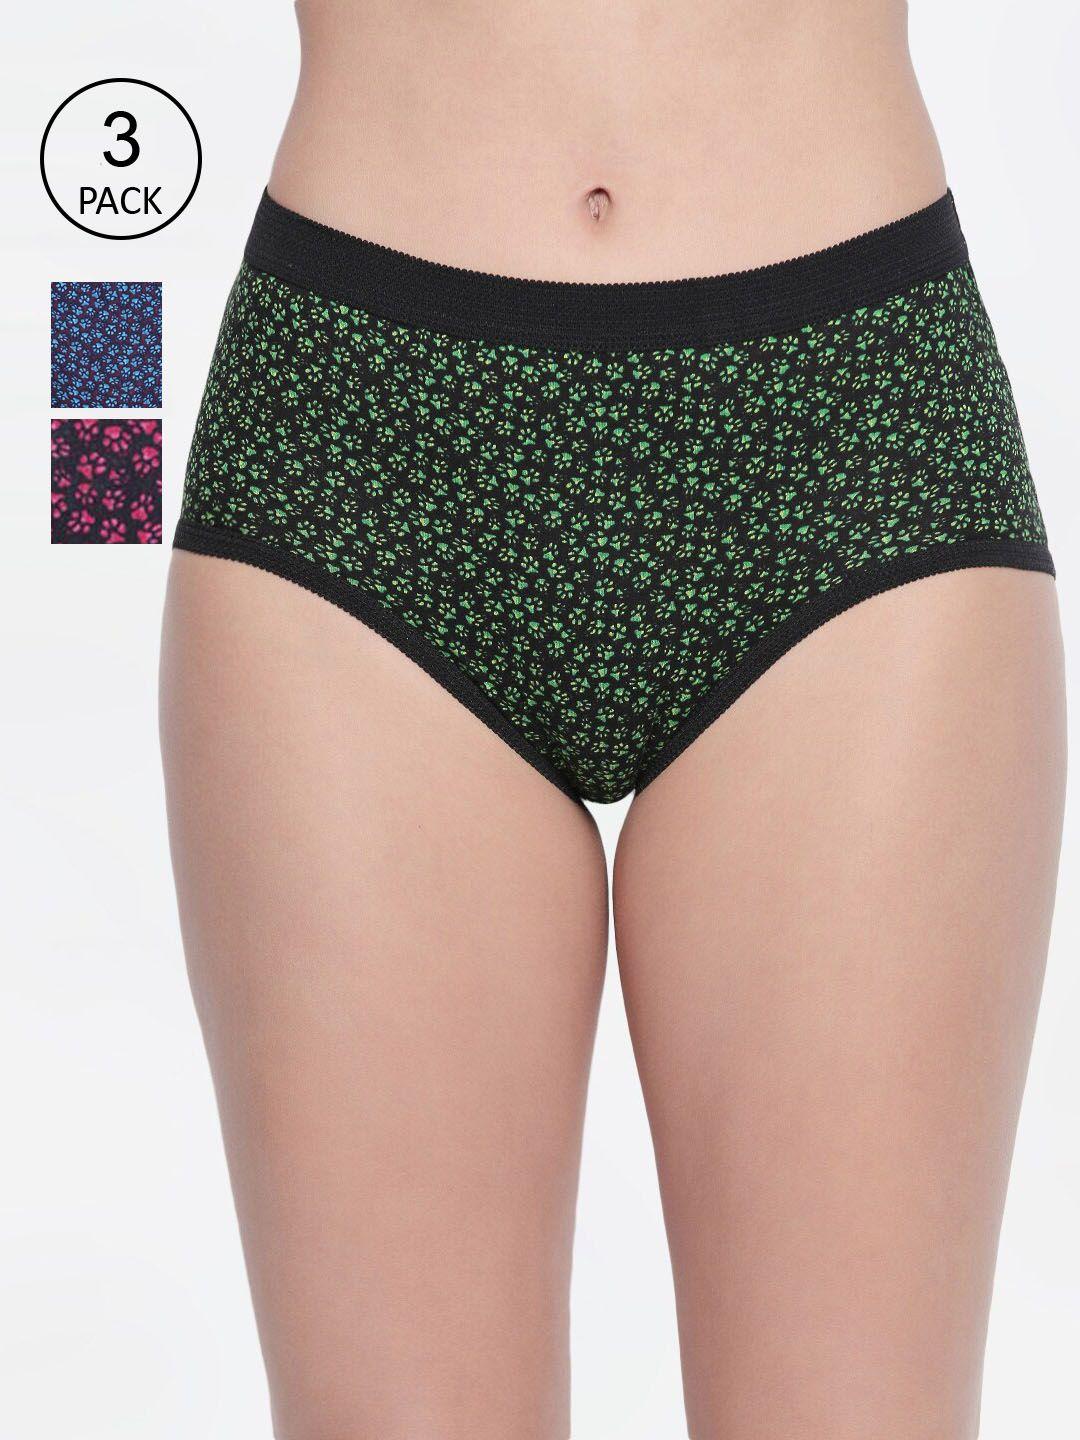 bodycare women pack of 3 printed mid rise hipster briefs 25000-3pcs-2xl